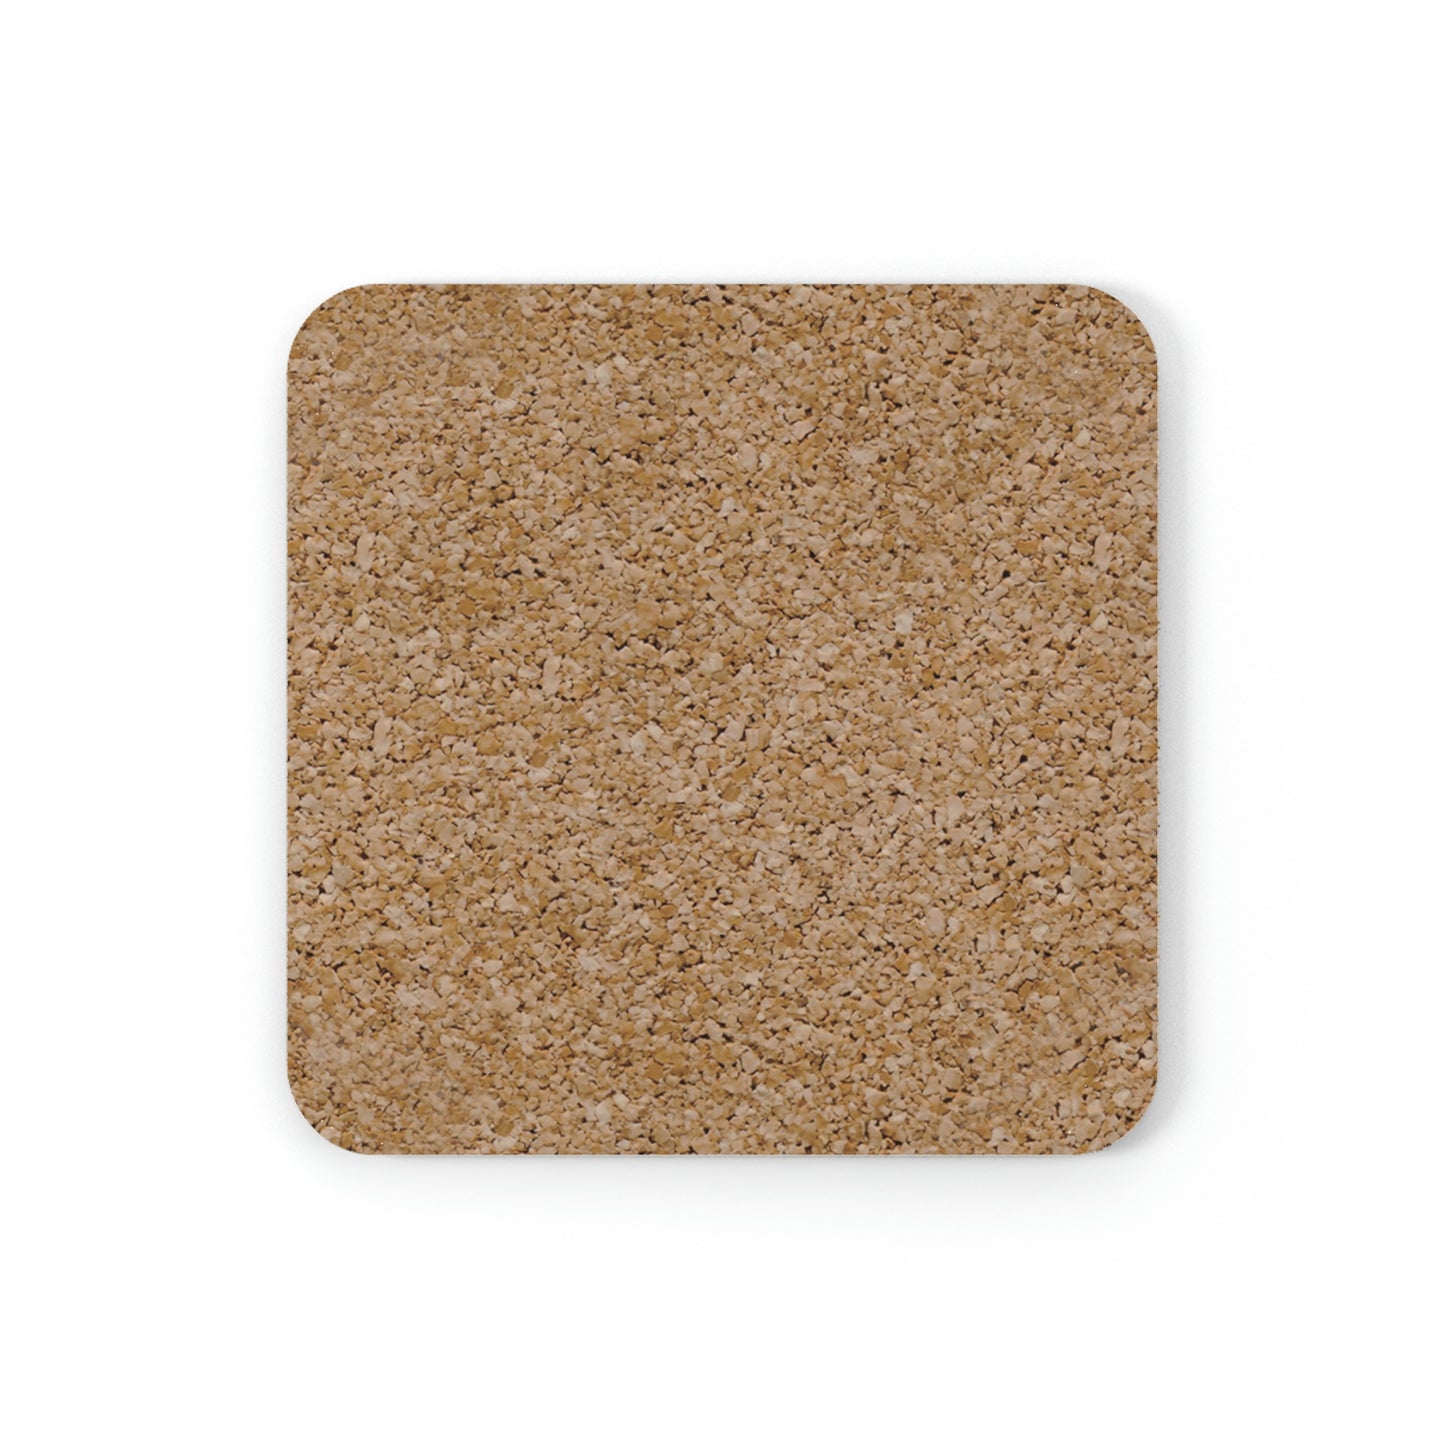 Life is Golden Cork Back Coaster (Green/Yellow Ombre)